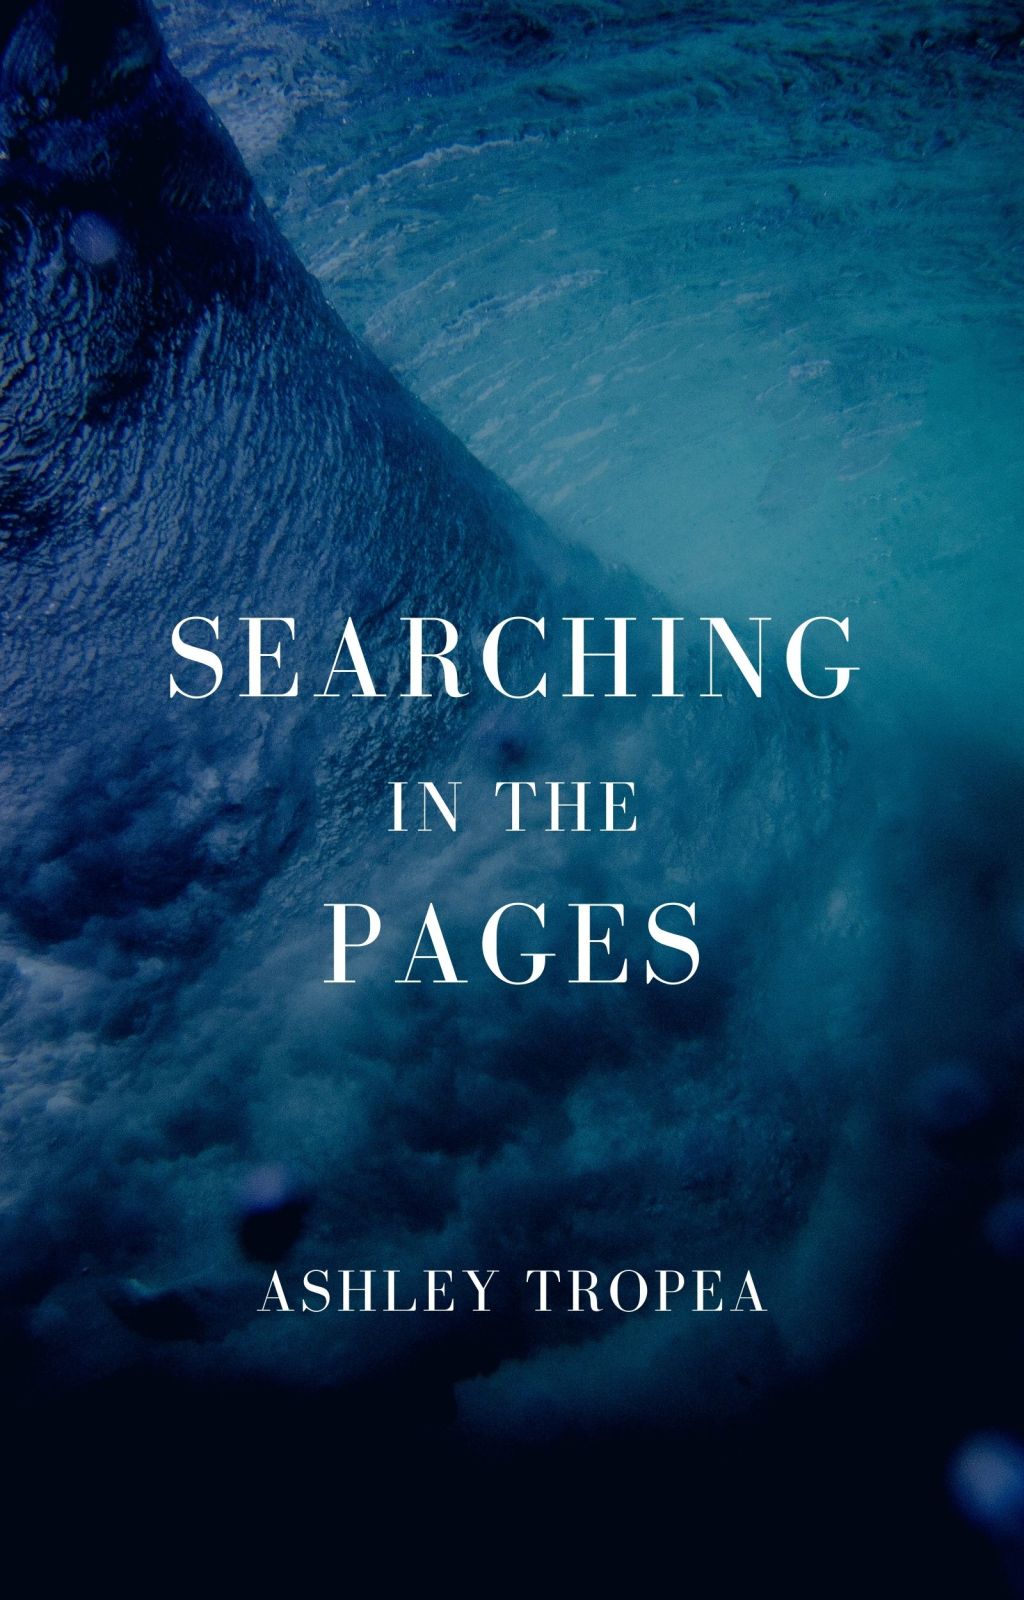 Searching in the Pages (Pirates Trilogy #2) is Now Available on Amazon!